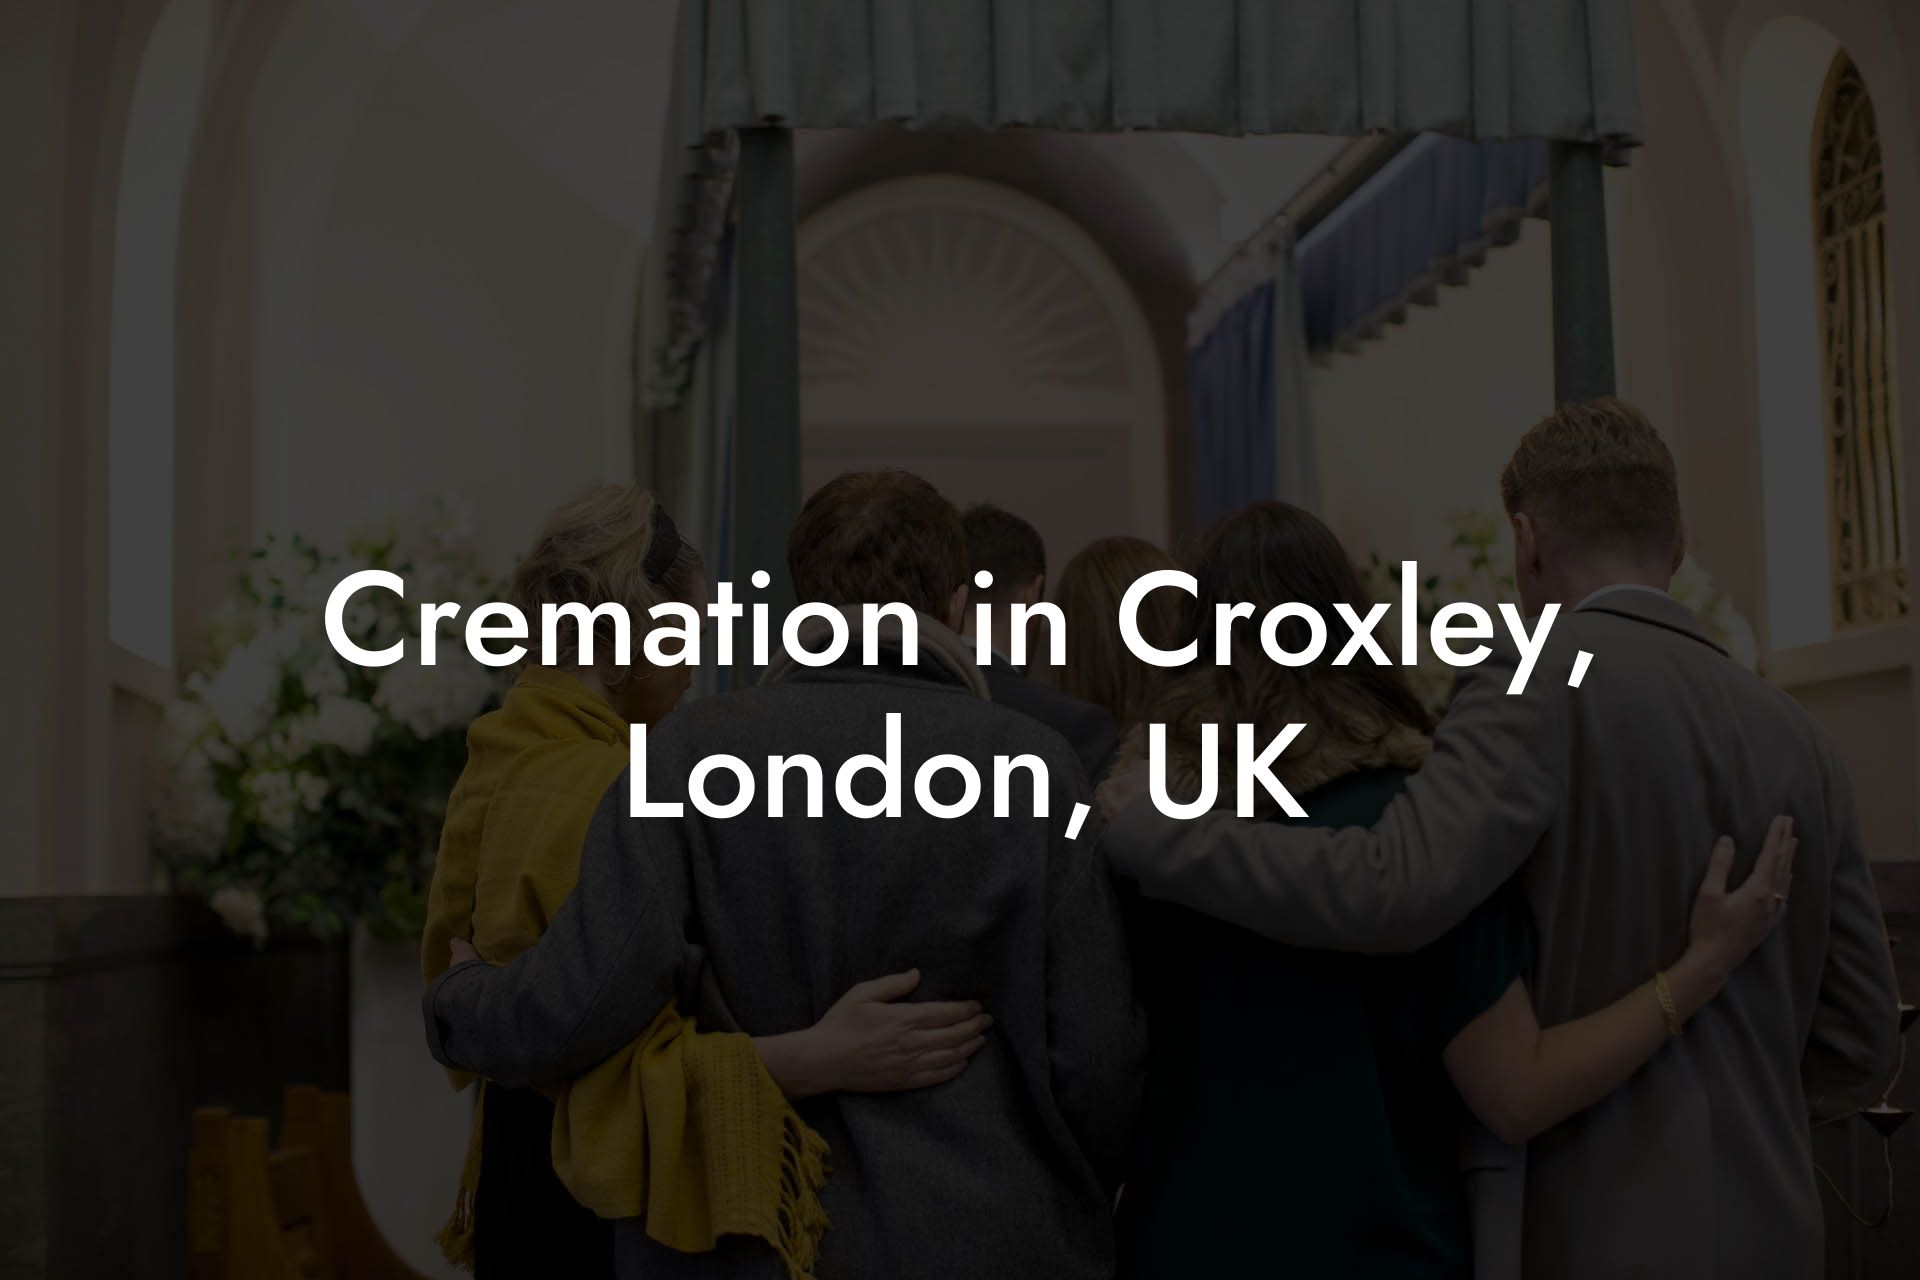 Cremation in Croxley, London, UK